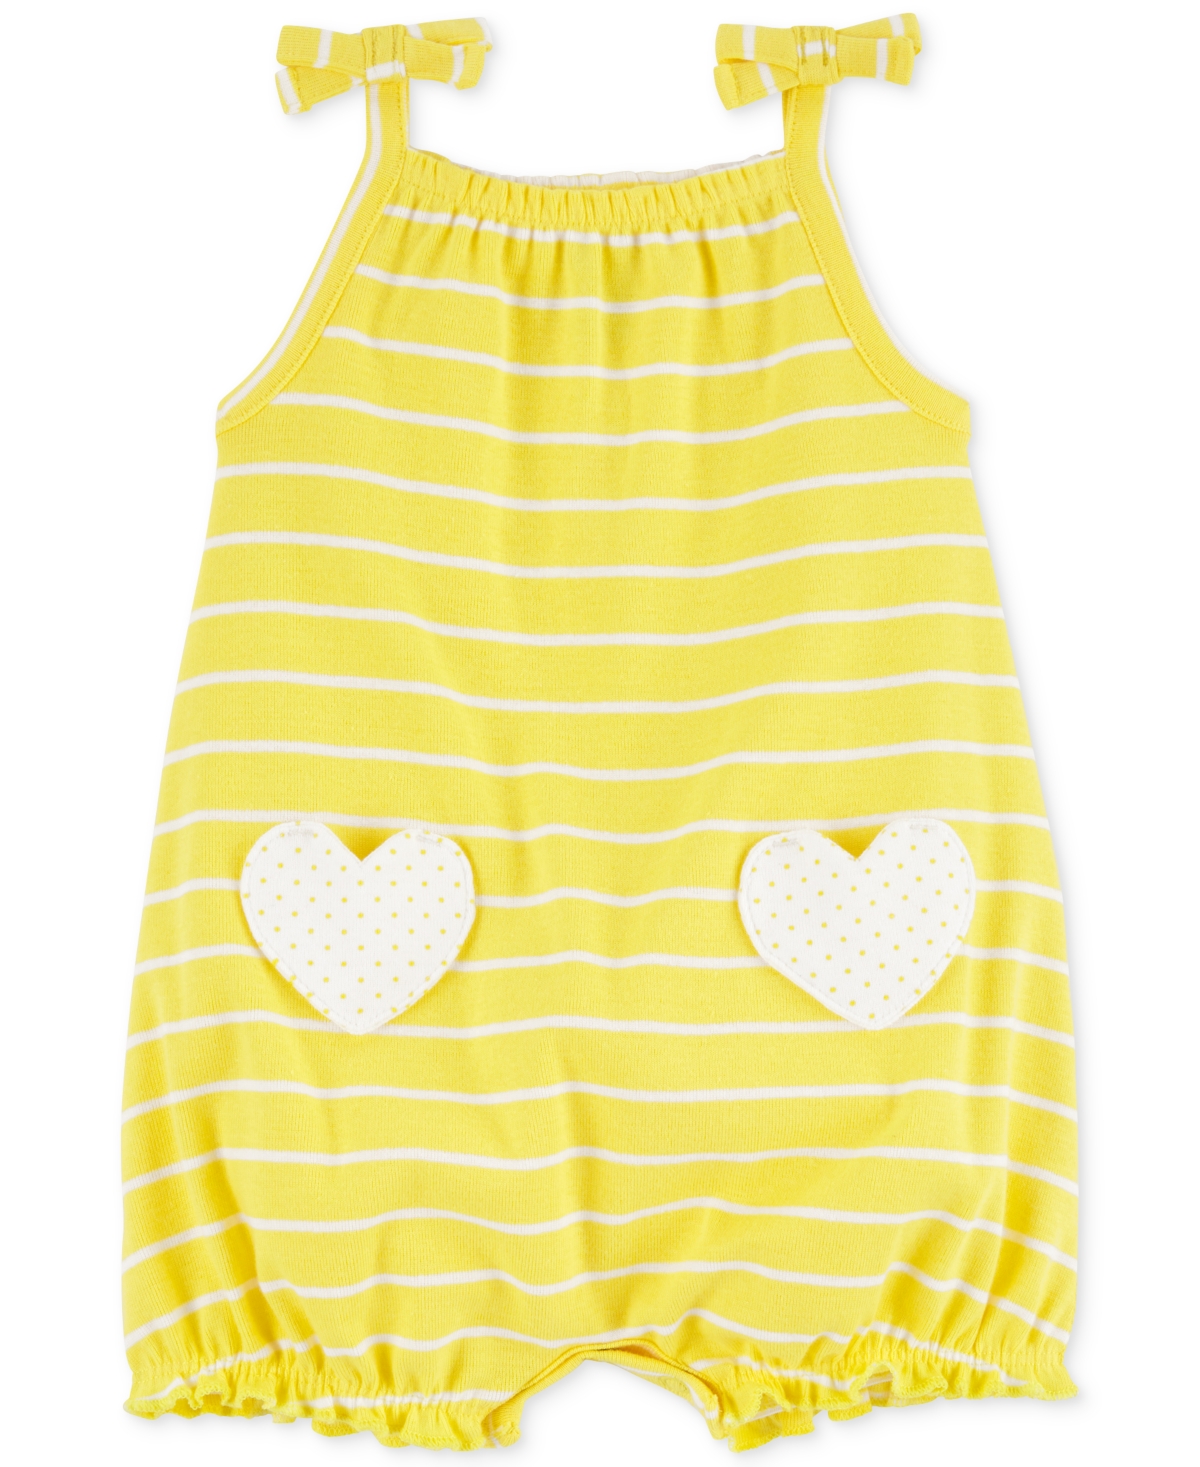 Carter's Baby Girls Heart Pocket Striped Cotton Romper In Yellow